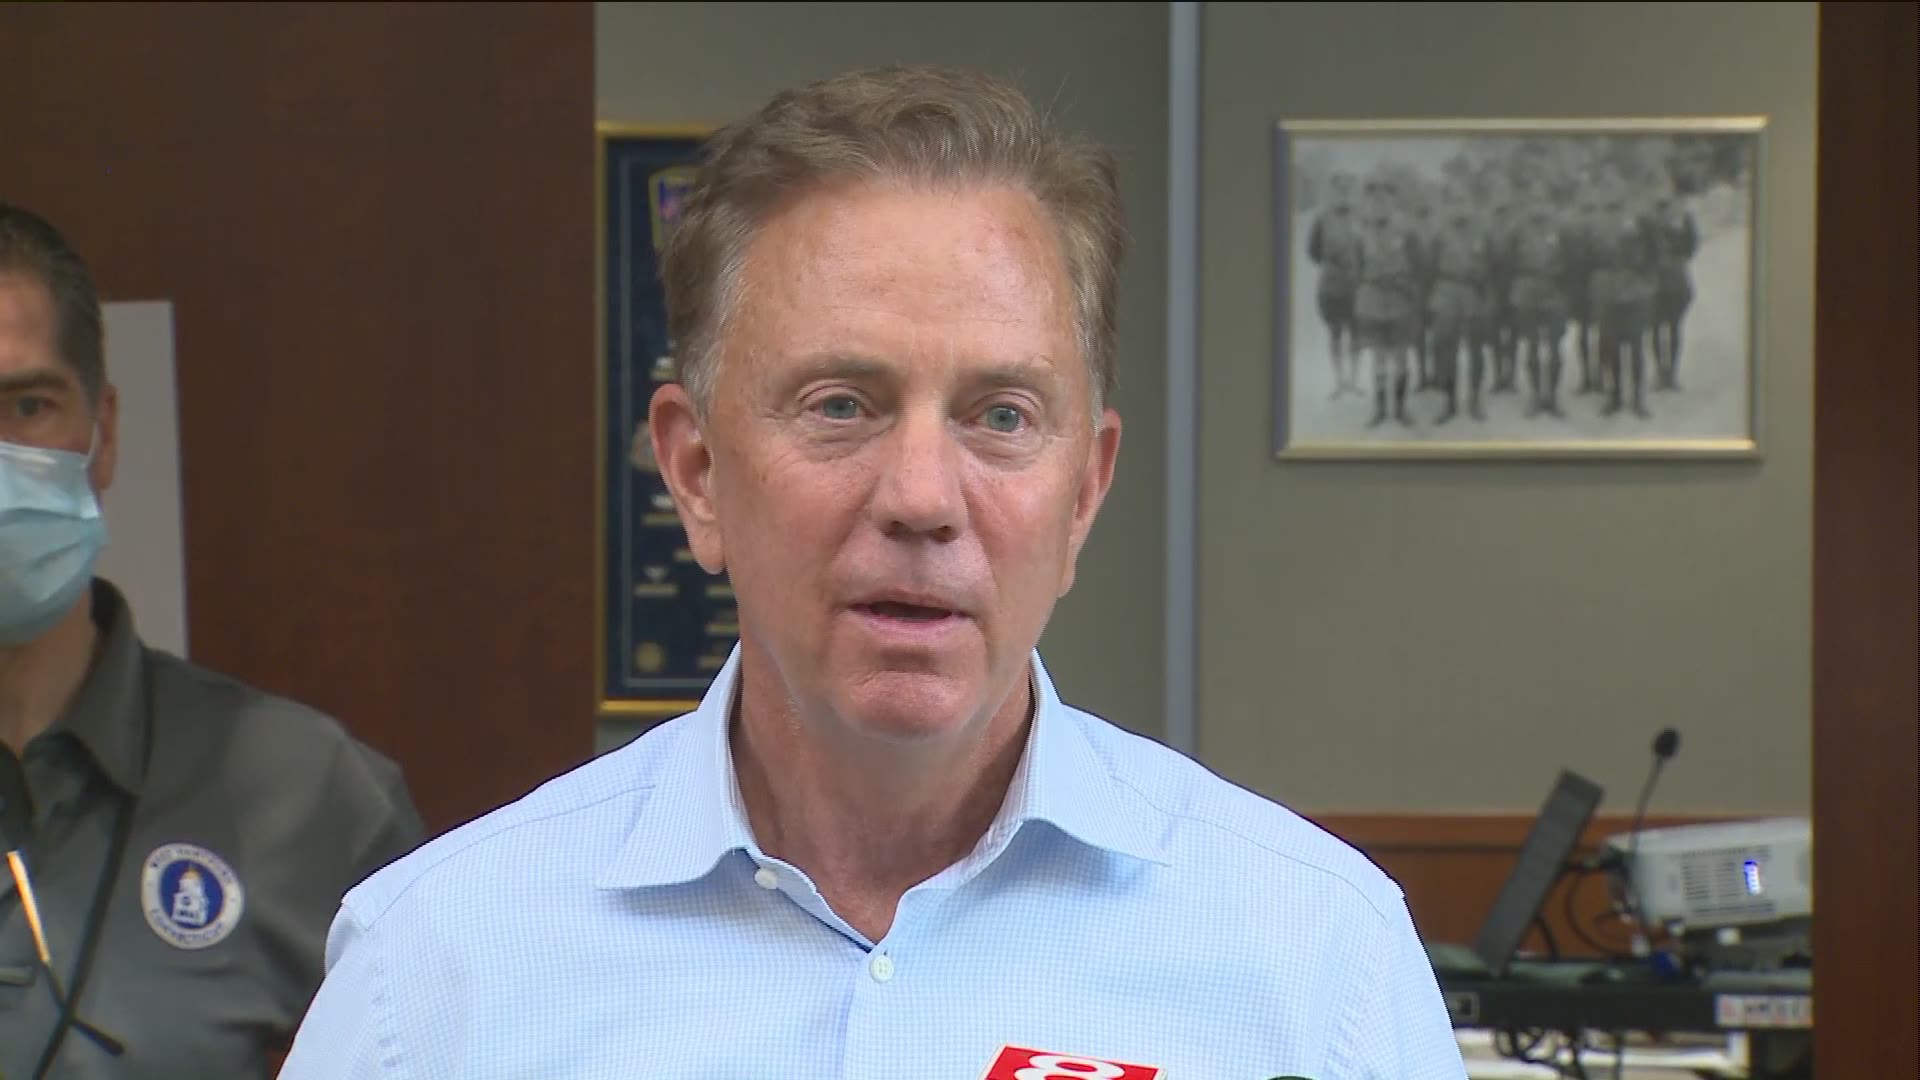 While frustrated because many CT residents remain without power, Gov. Lamont also thanked all the workers responding to damage that Isaias left behind.